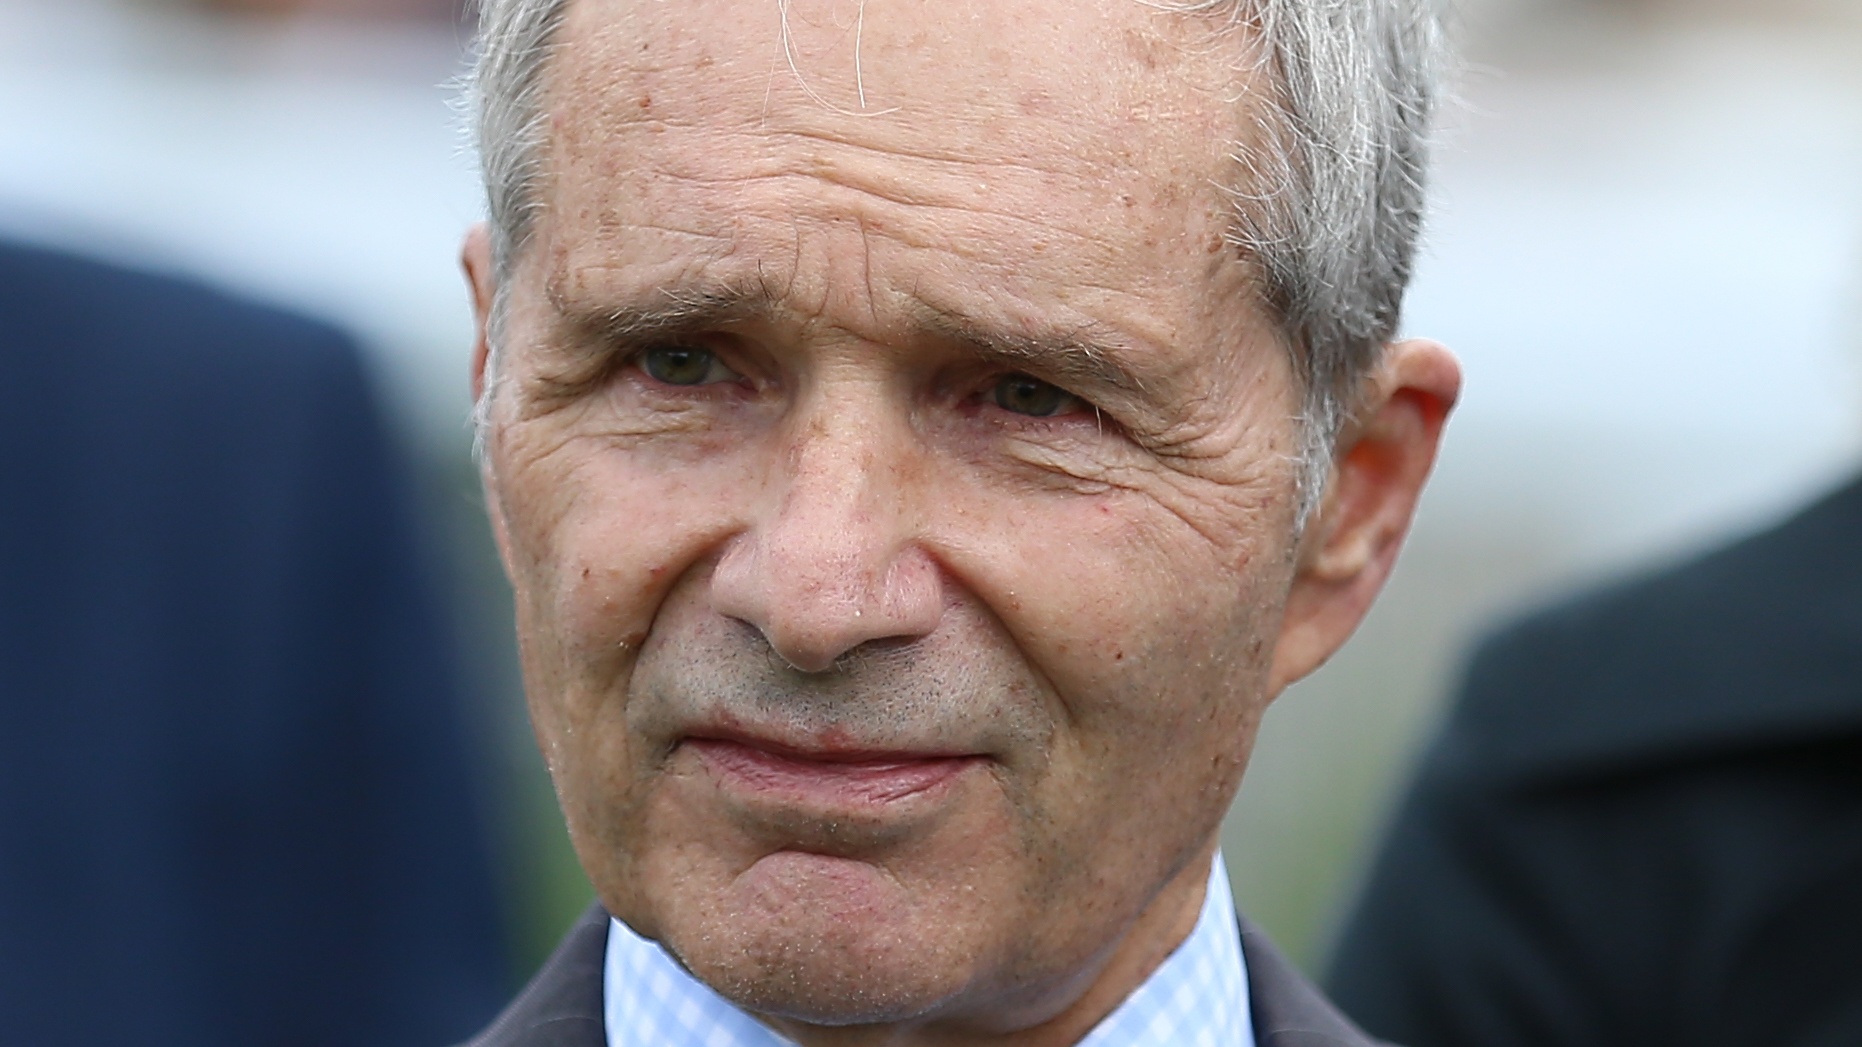 Andre Fabre saddles Alcantor in Thursday's Craven Stakes at Newmarket